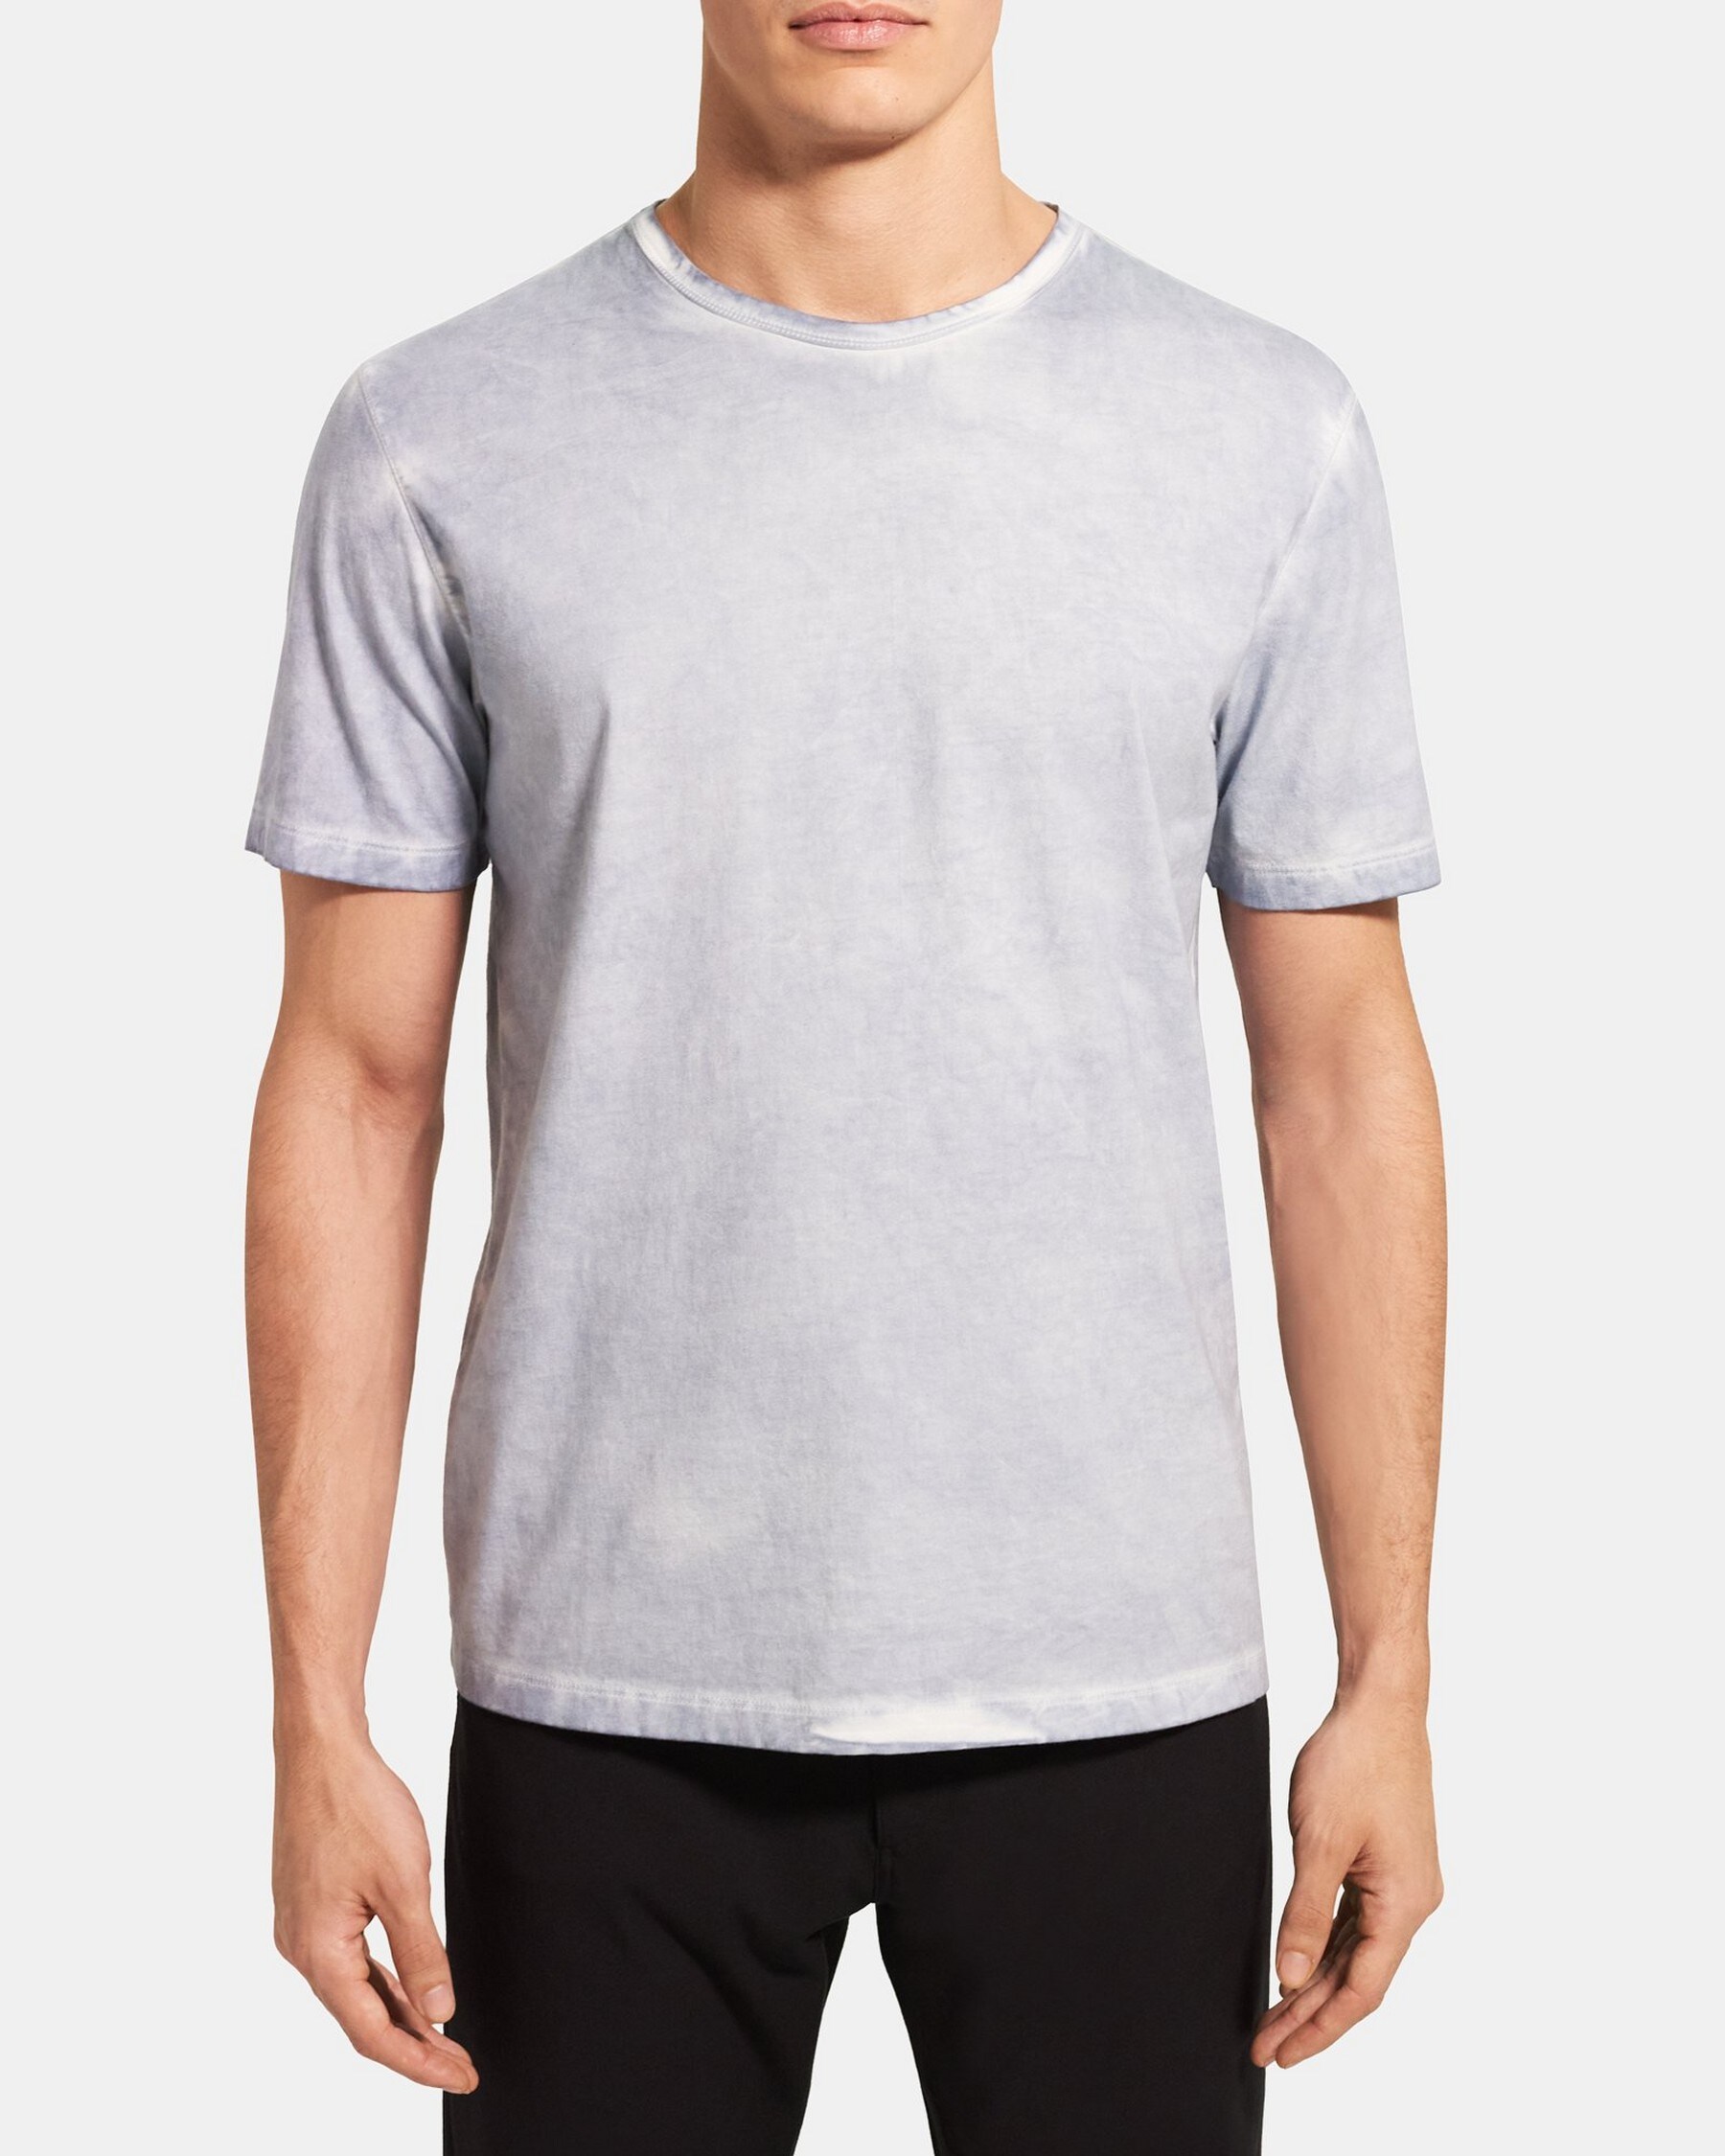 Relaxed Tee in Cotton Jersey